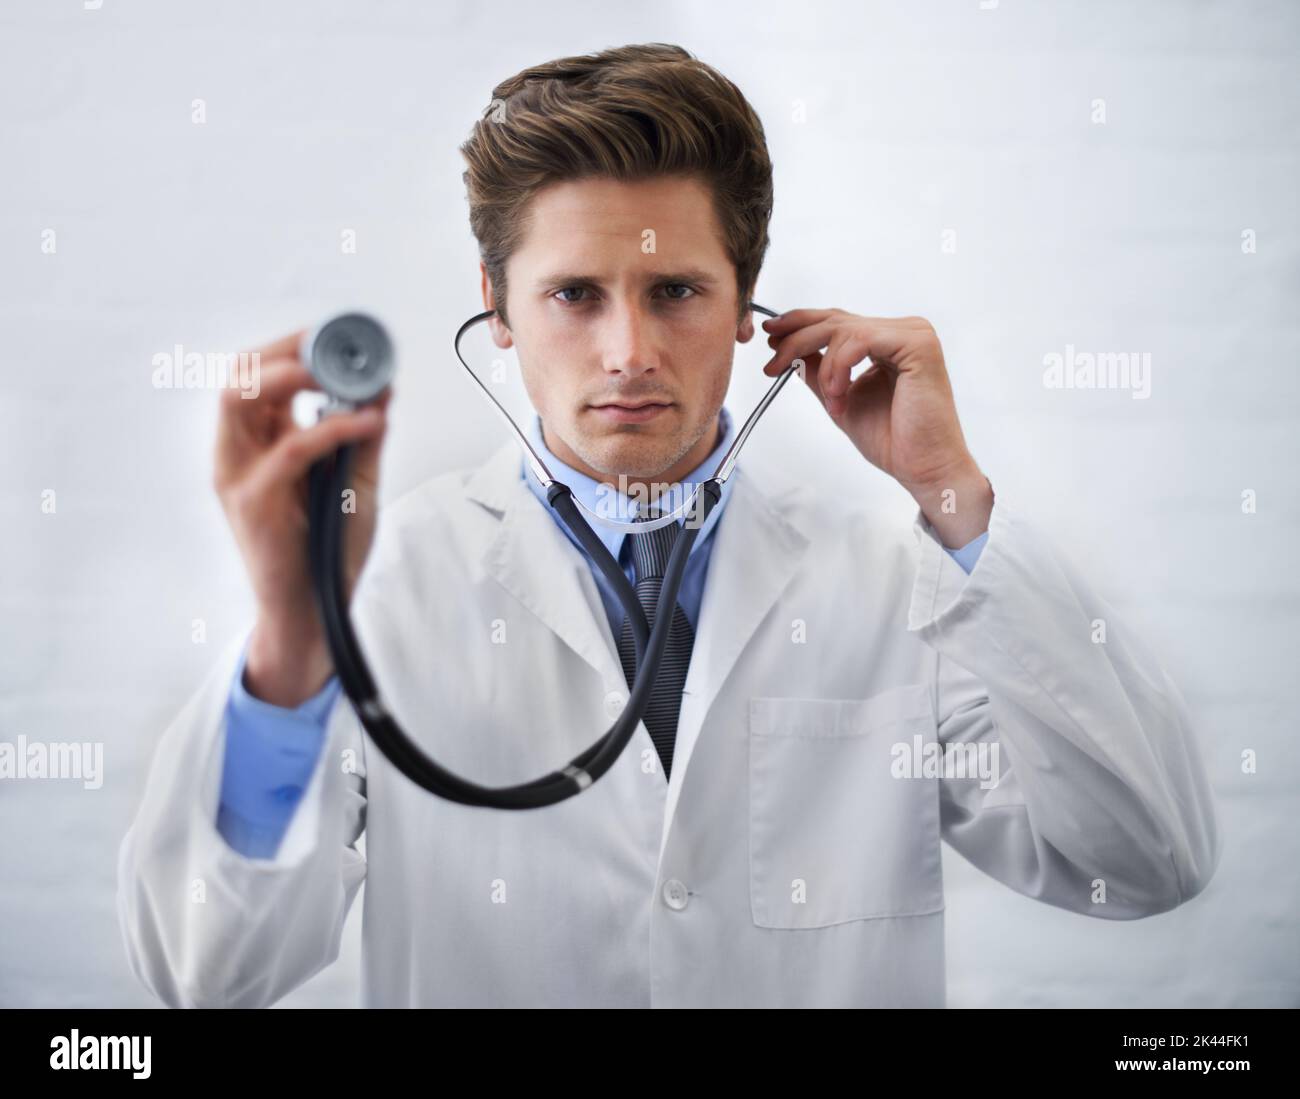 Examination time. a serious-looking doctor holding up the end of a stethoscope toward the camera. Stock Photo